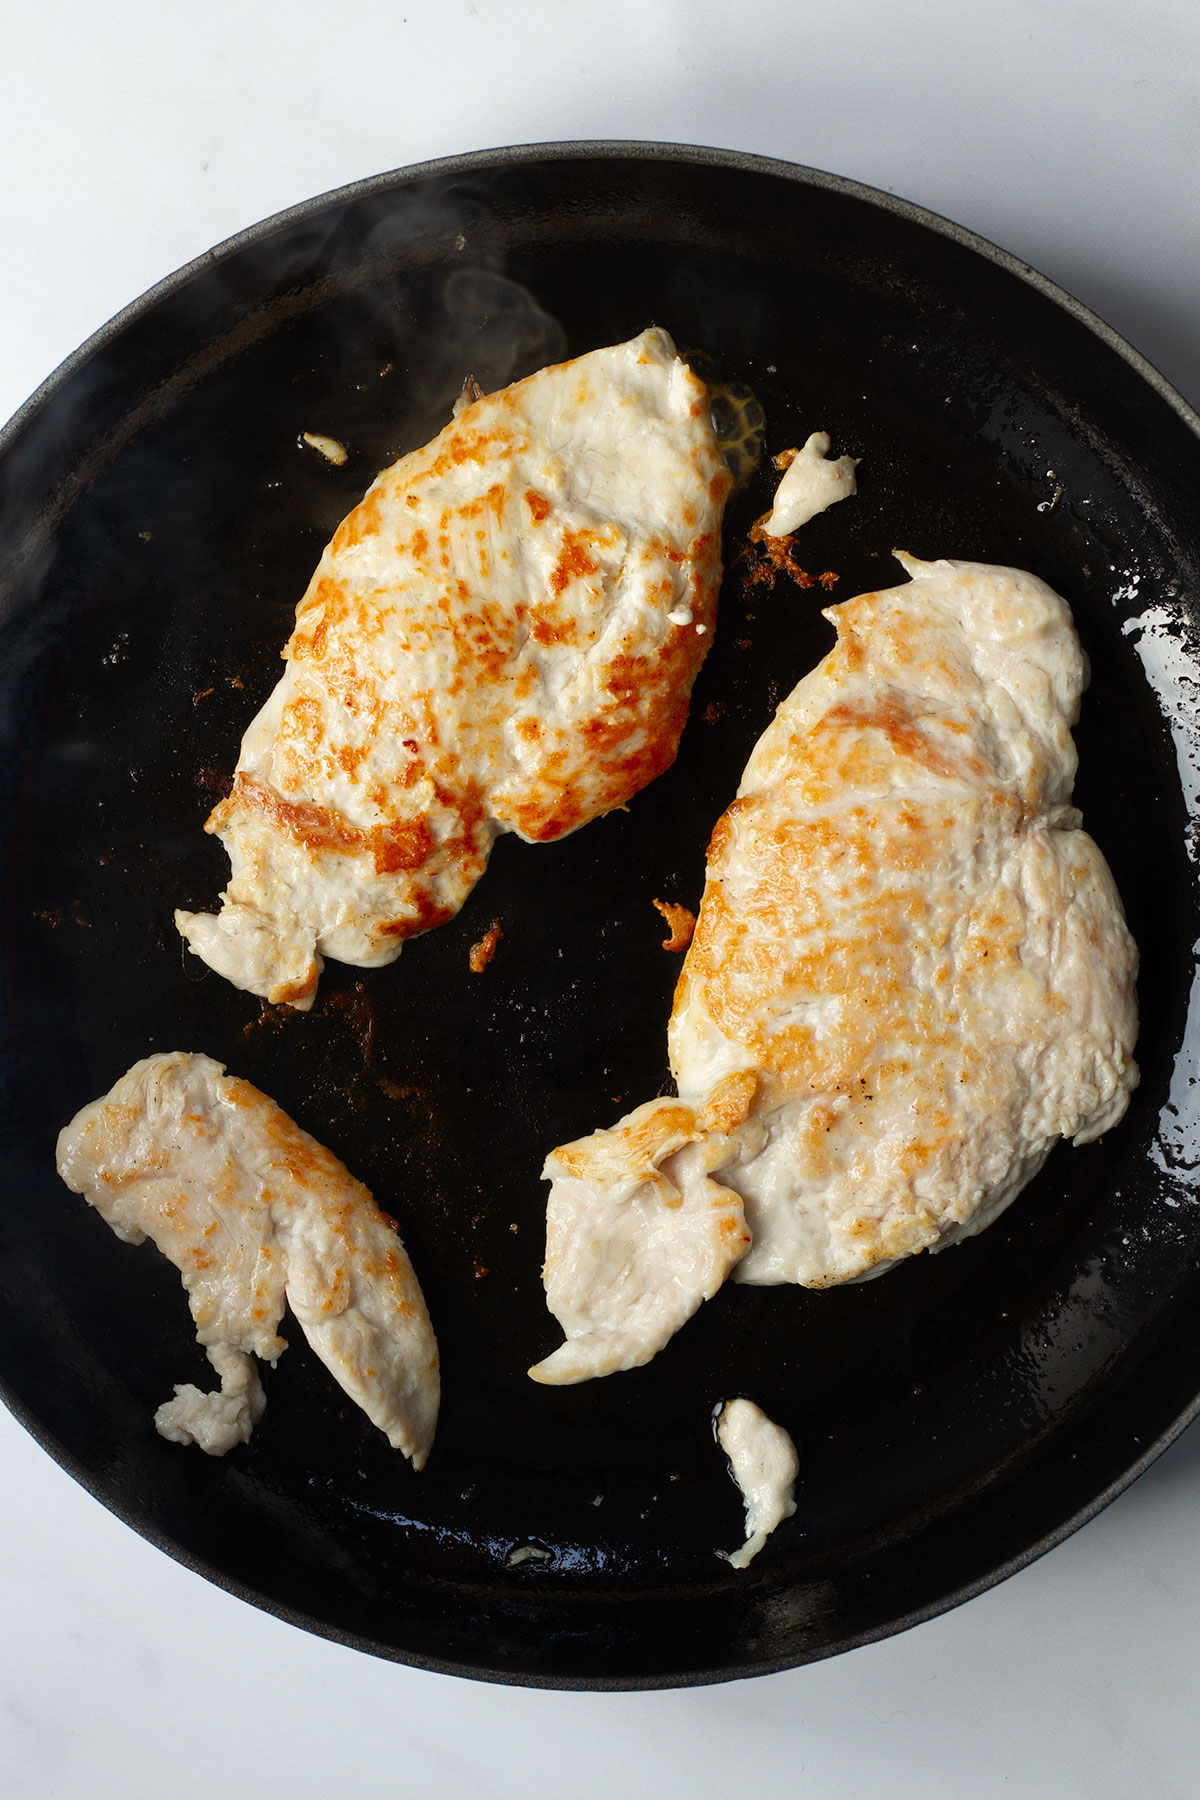 Grilling the chicken breasts for about 2-3minutes per side in a dark coloured frying pan until they are cooked through and starting to brown.